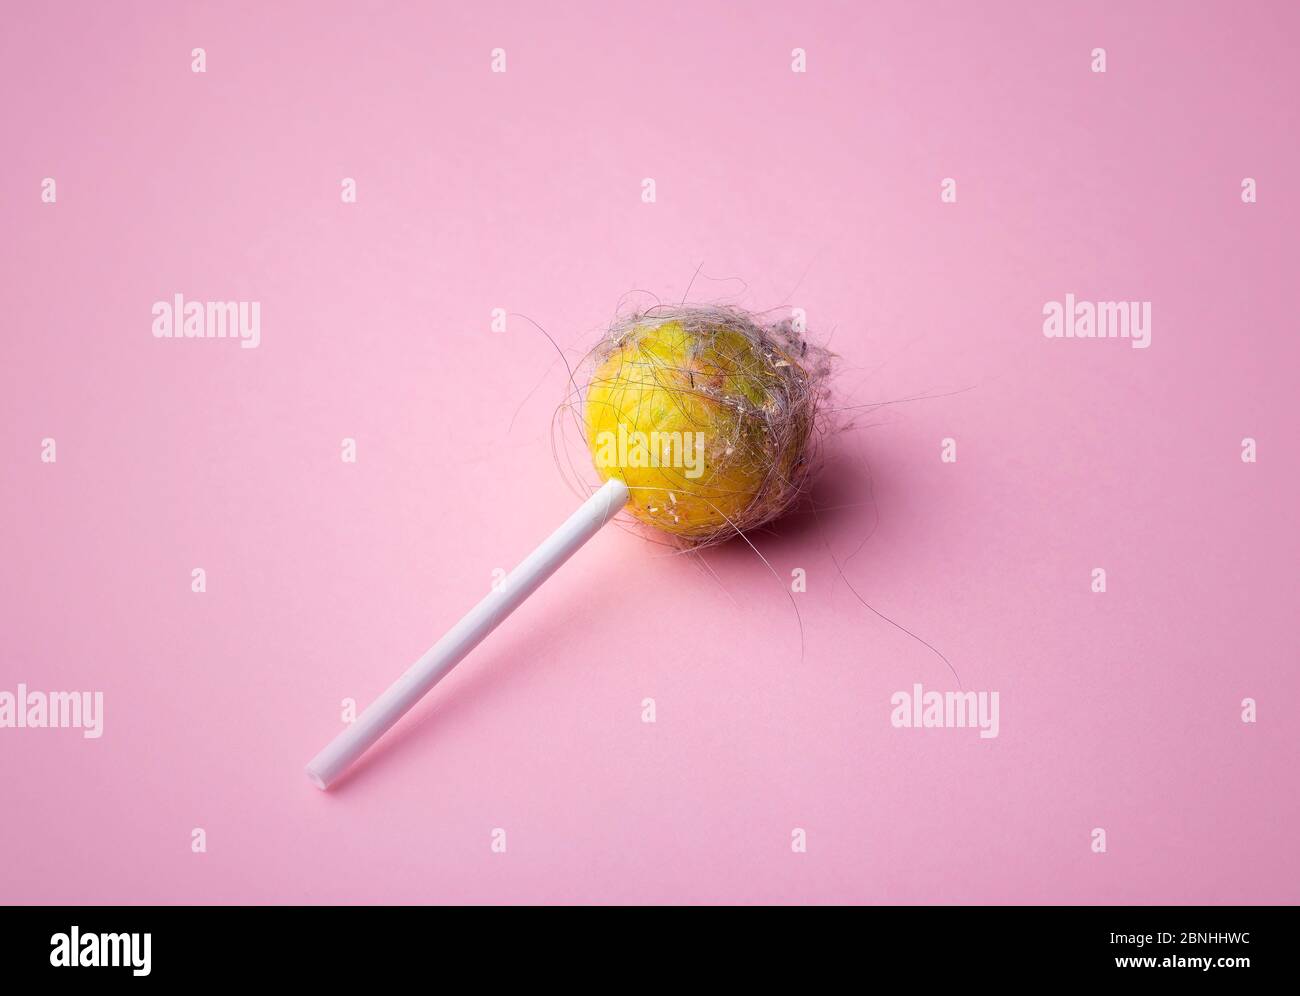 dirty-lollipop-on-a-pink-background-lollipop-with-hair-dust-and-dirt-on-an-empty-minimal-background-minimal-art-concept-2BNHHWC.jpg